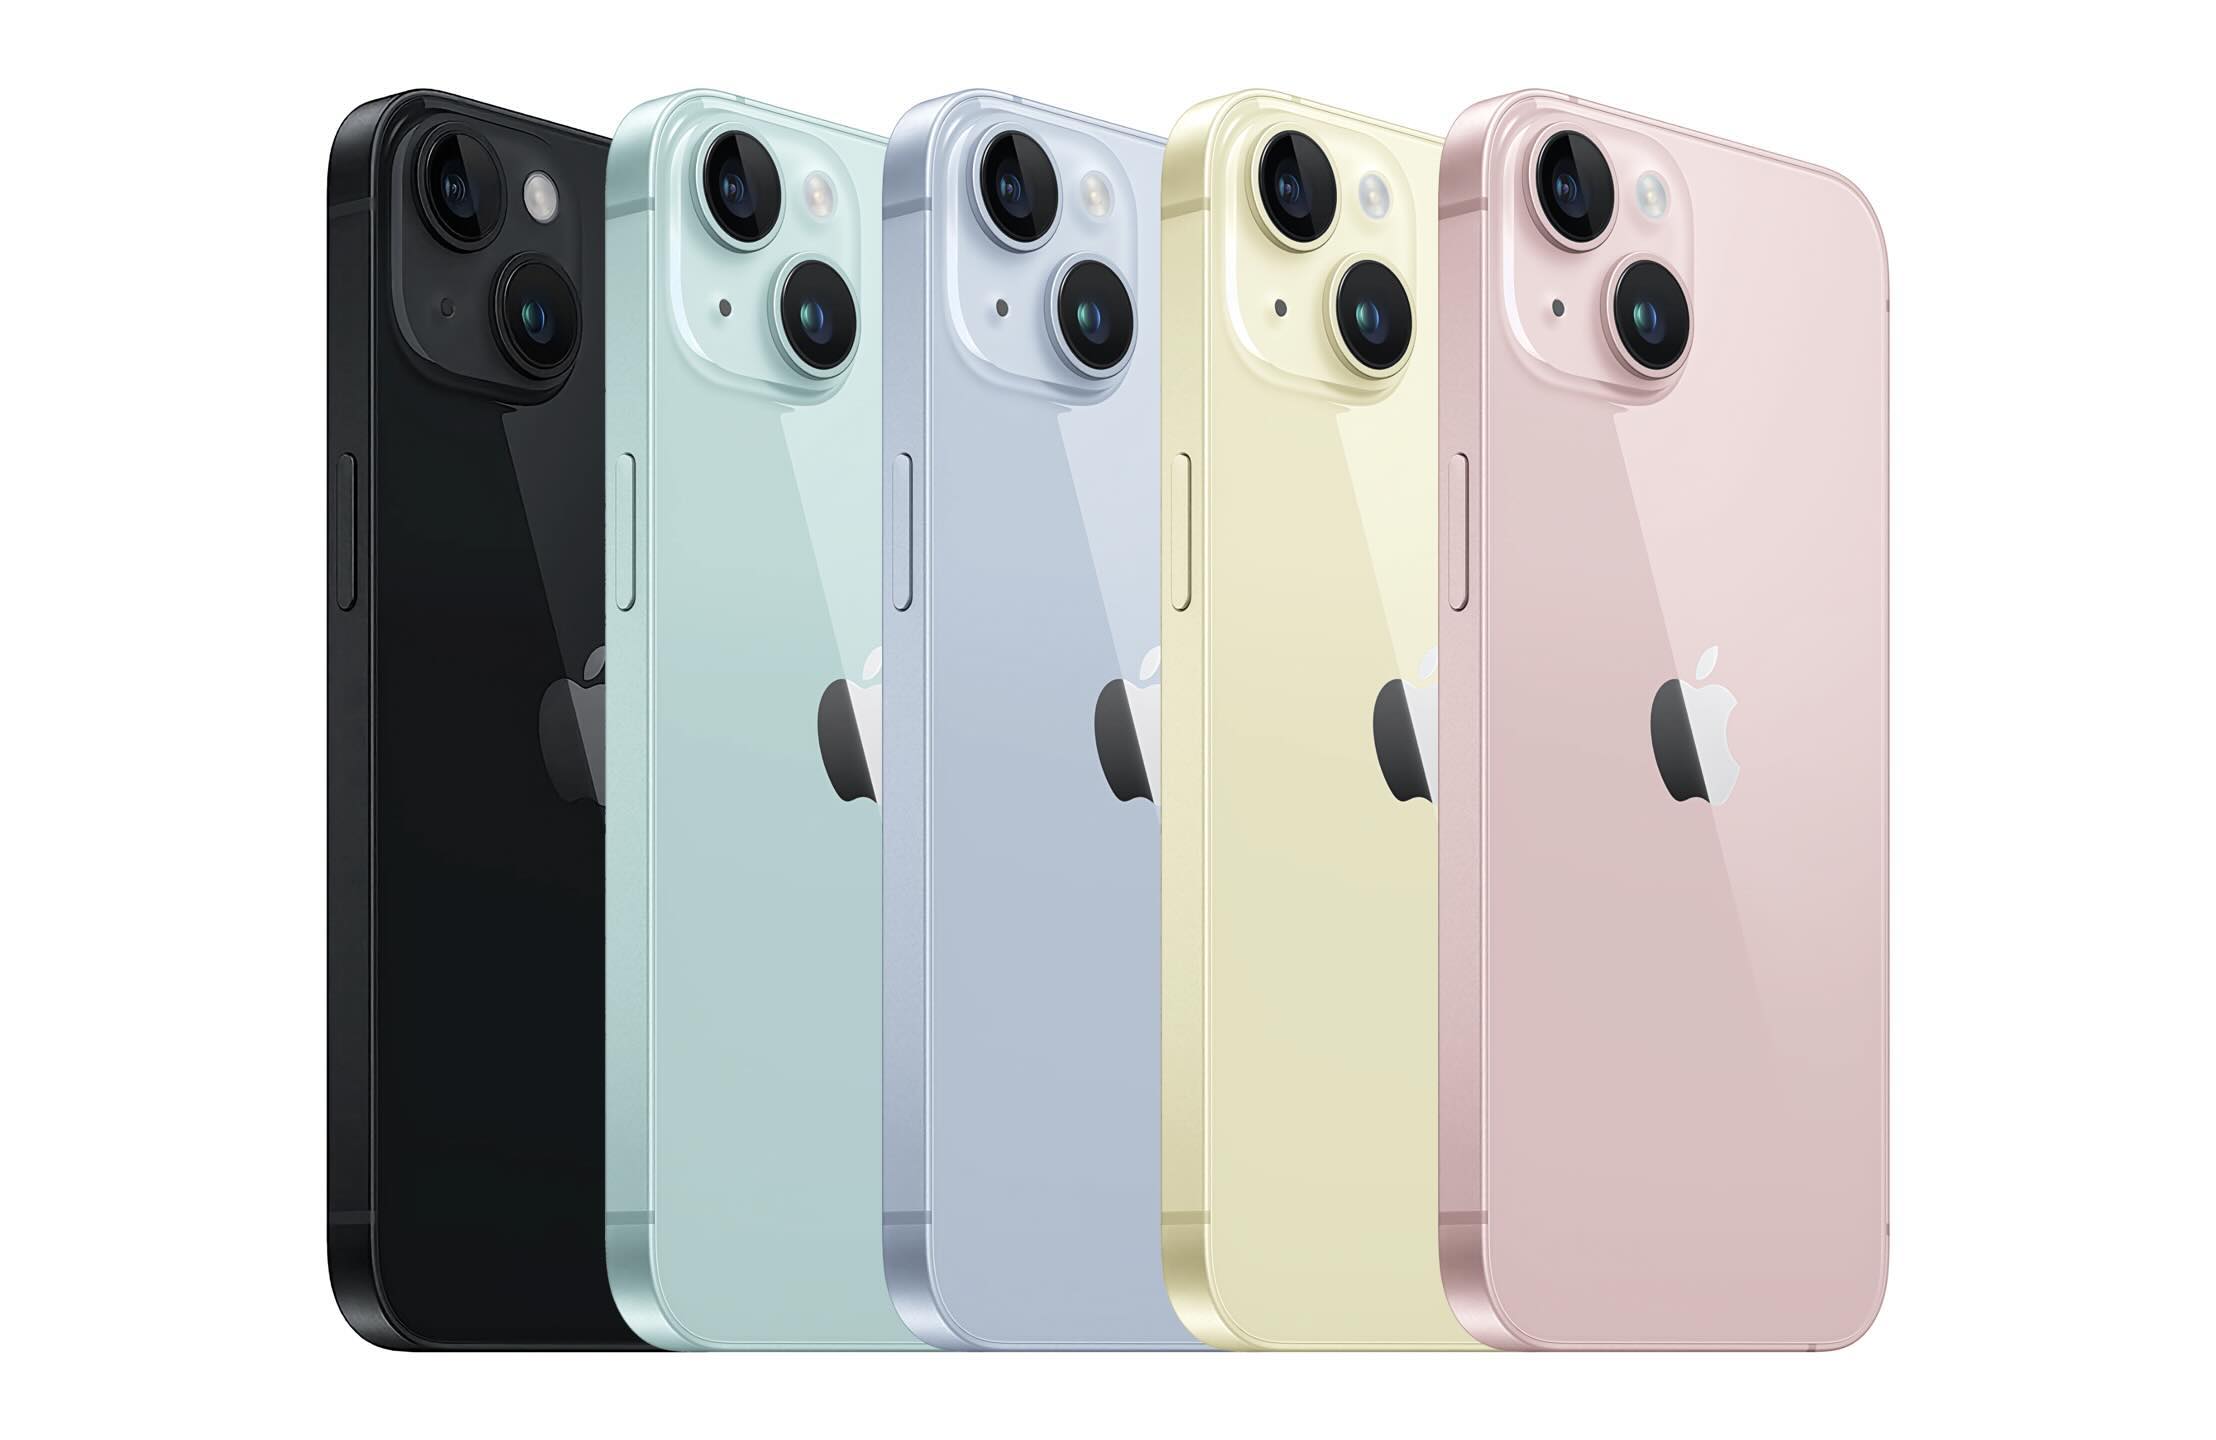 iPhone 15 color family includes: Black, Green, Blue, Yellow, and Pink.